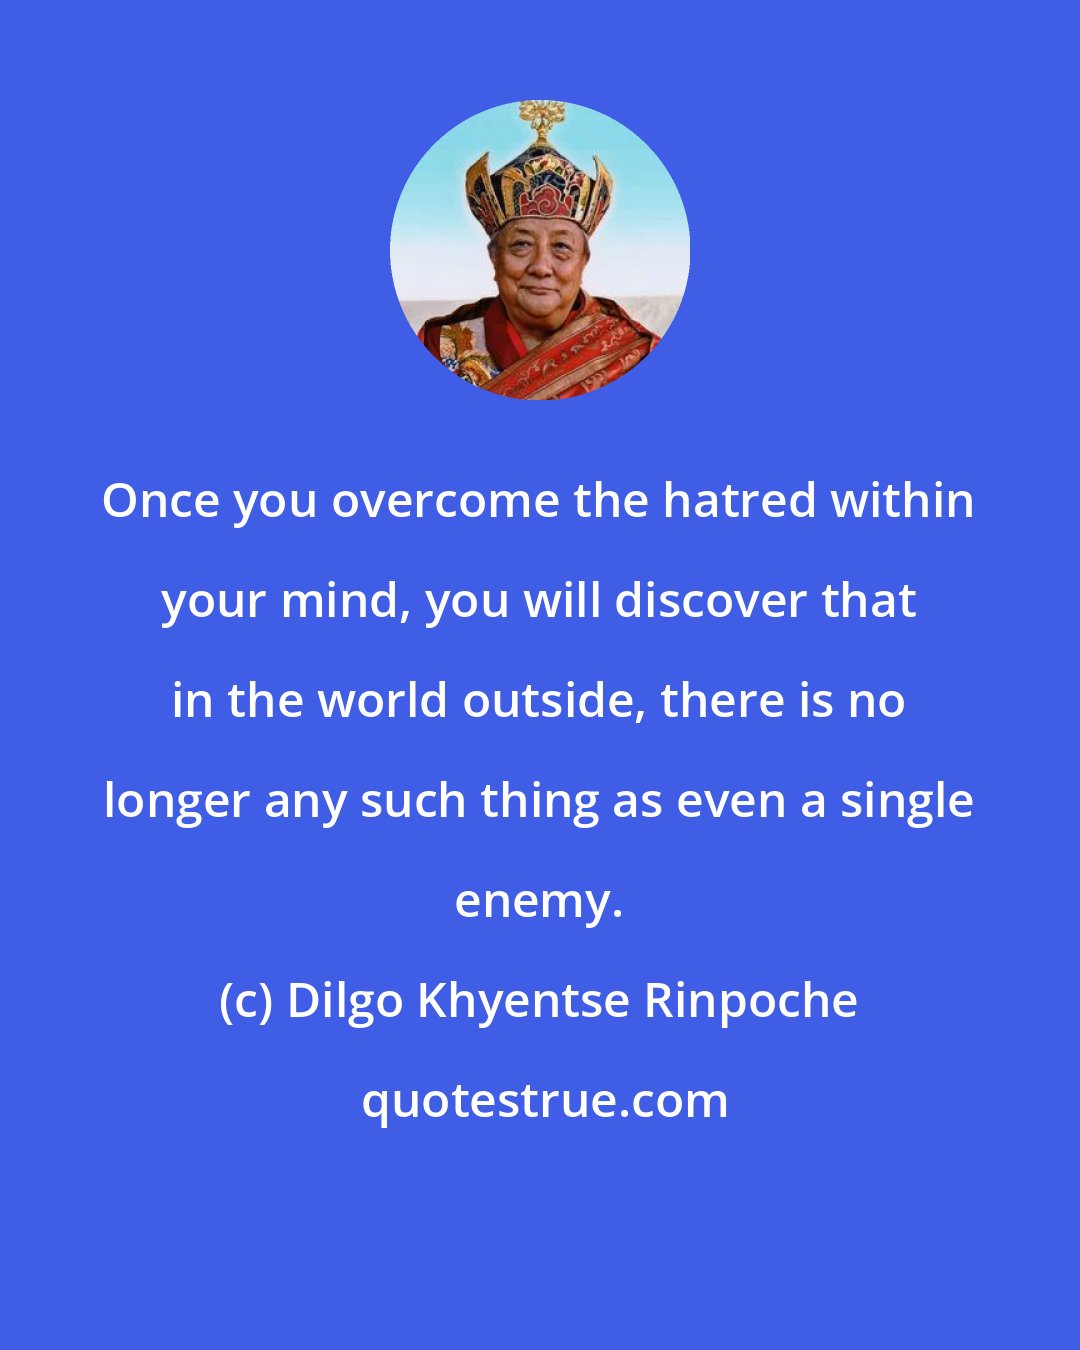 Dilgo Khyentse Rinpoche: Once you overcome the hatred within your mind, you will discover that in the world outside, there is no longer any such thing as even a single enemy.